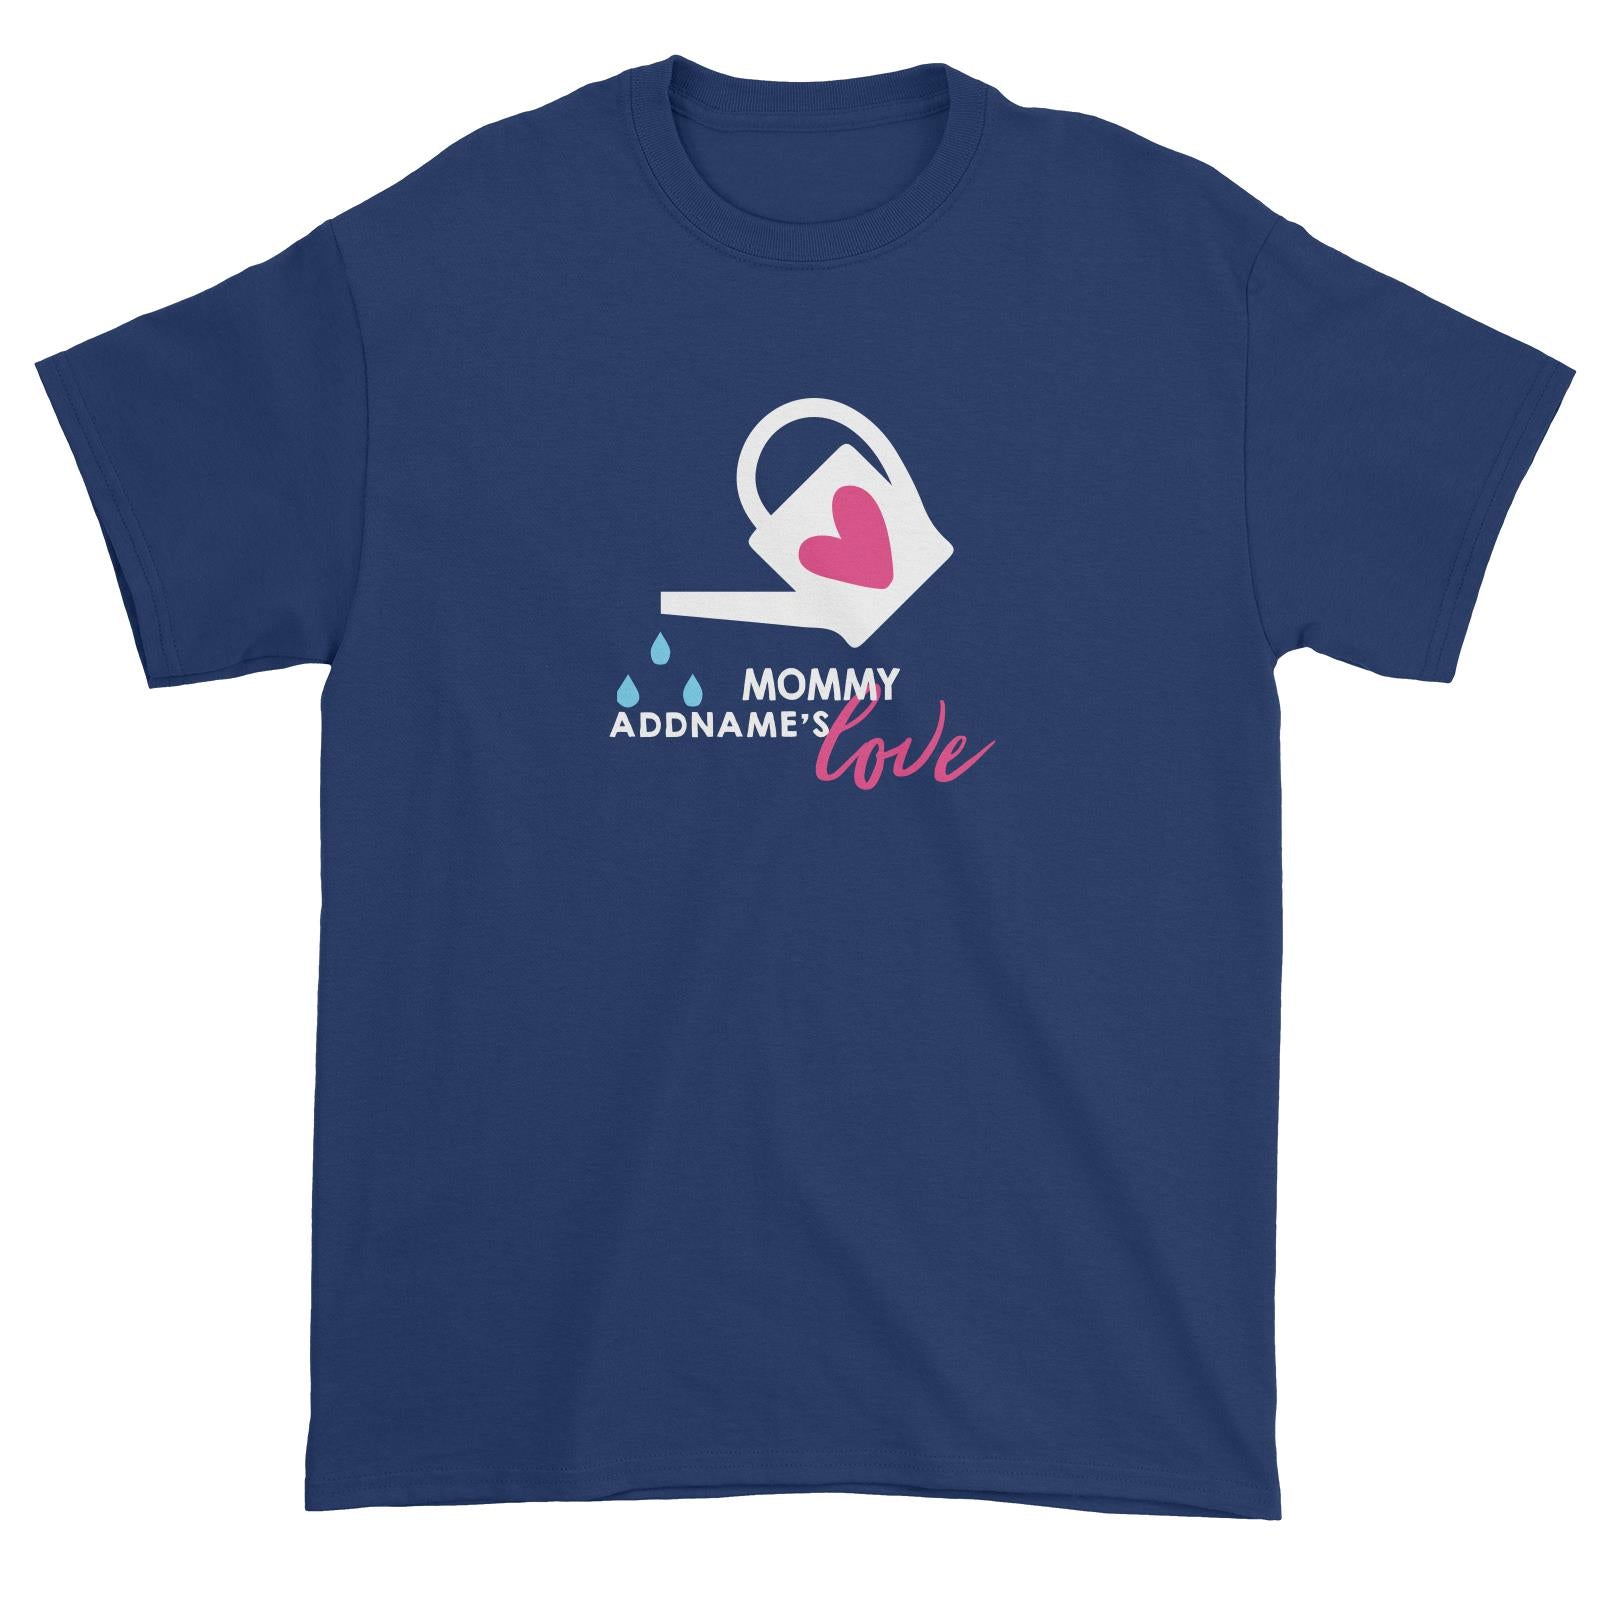 Nurturing Mommy's Love Addname Unisex T-Shirt  Matching Family Personalizable Designs